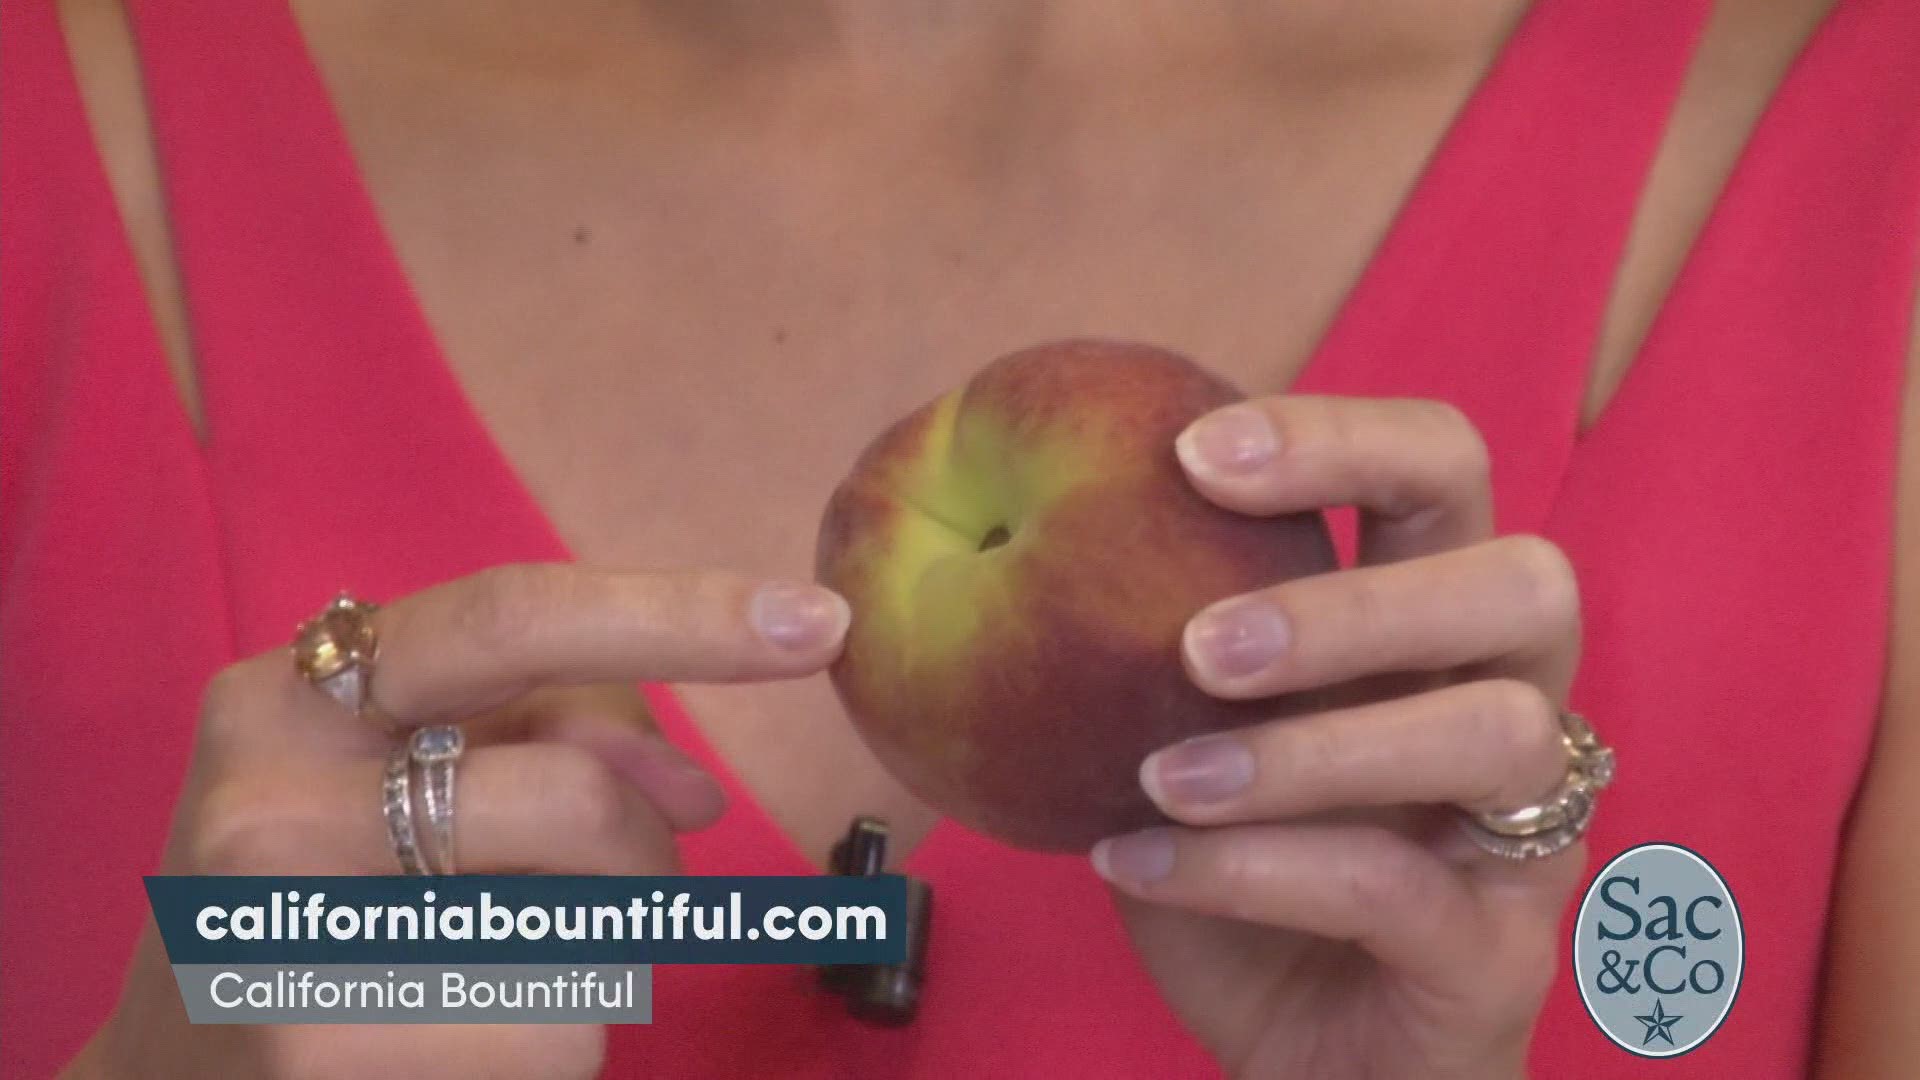 Find out how to pick out the perfect peach, how to cut it and even a family recipe that will leave your mouth watering! The following is a paid segment sponsored by California Bountiful.